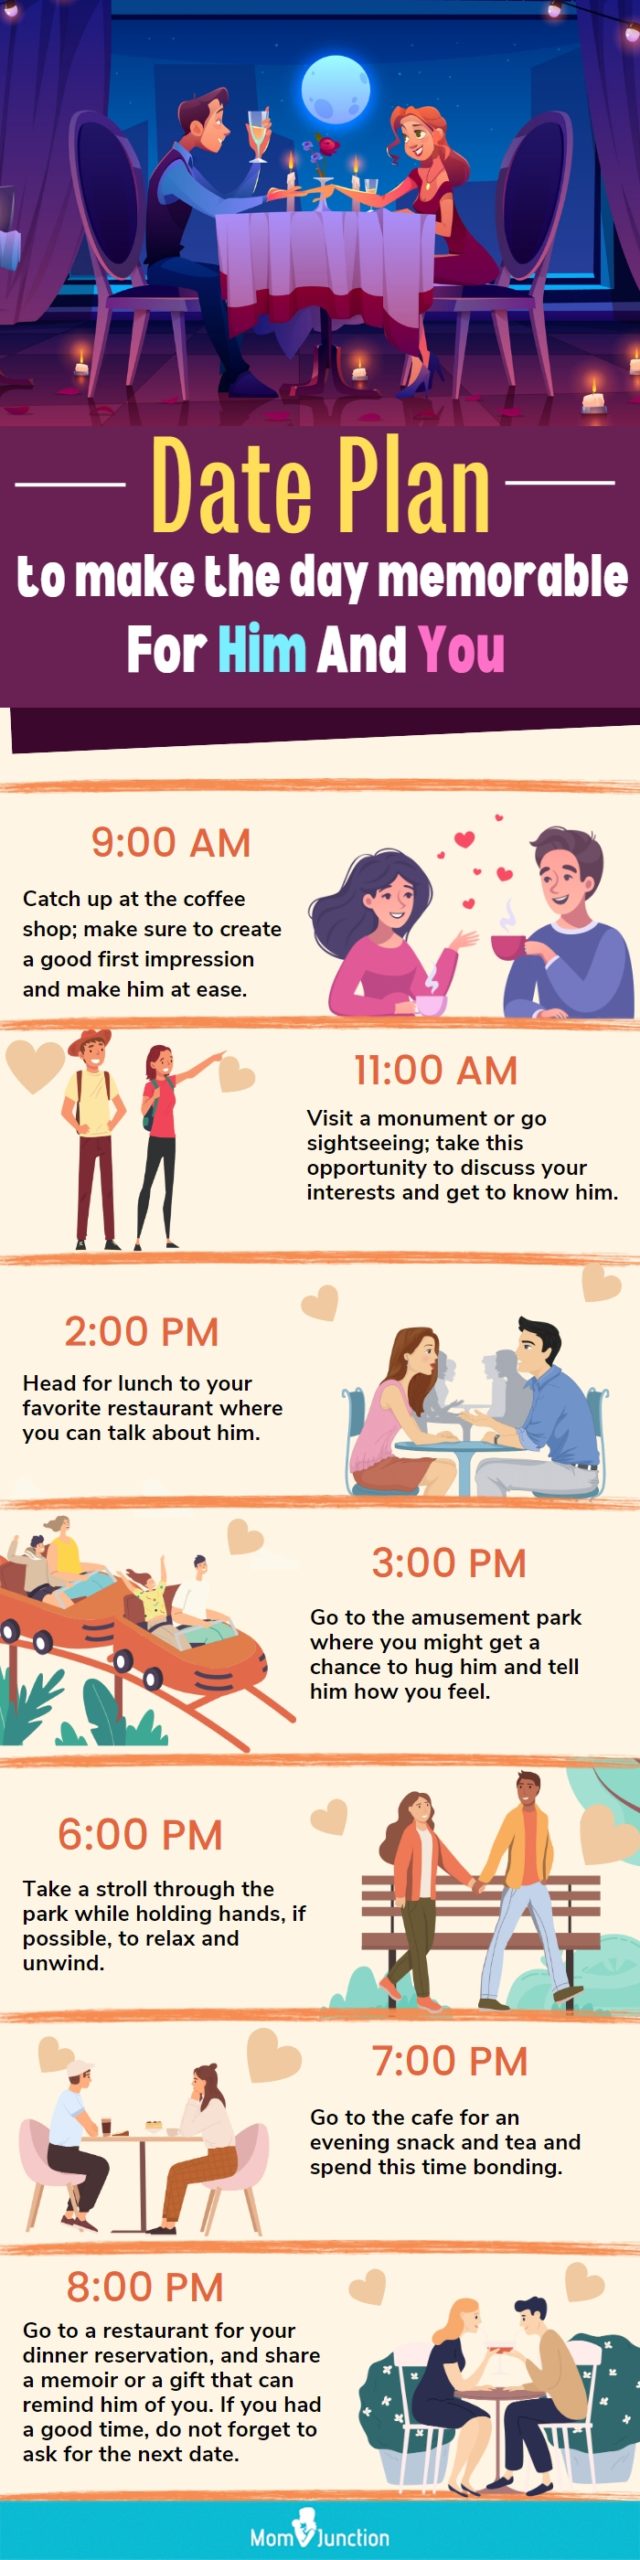 how should you plan for a date with your man (infographic)